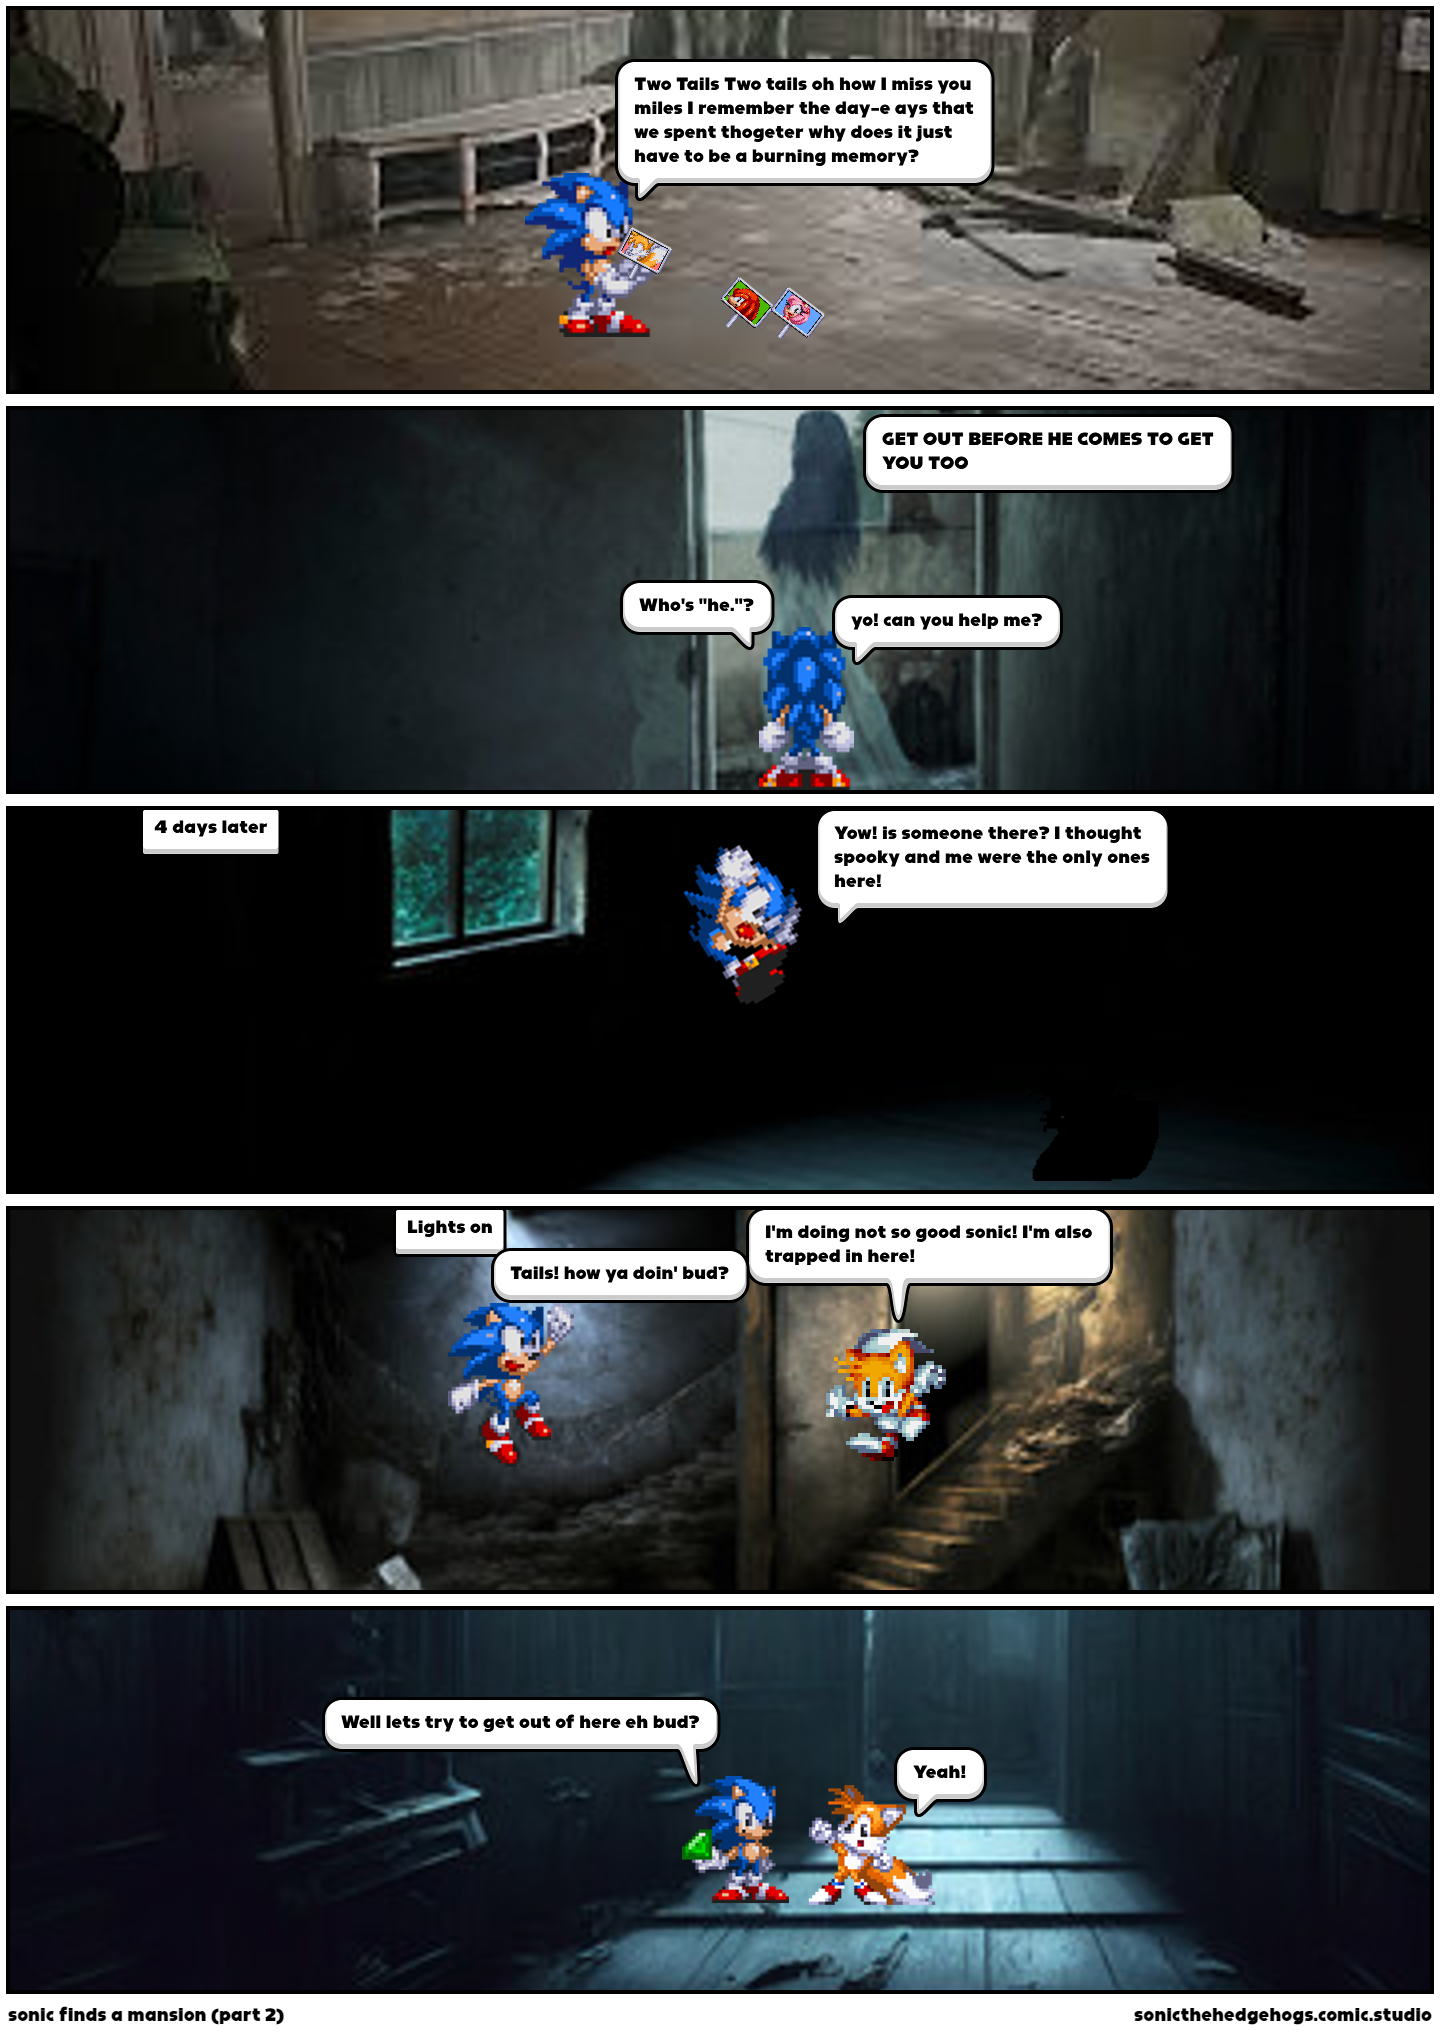 sonic finds a mansion (part 2)